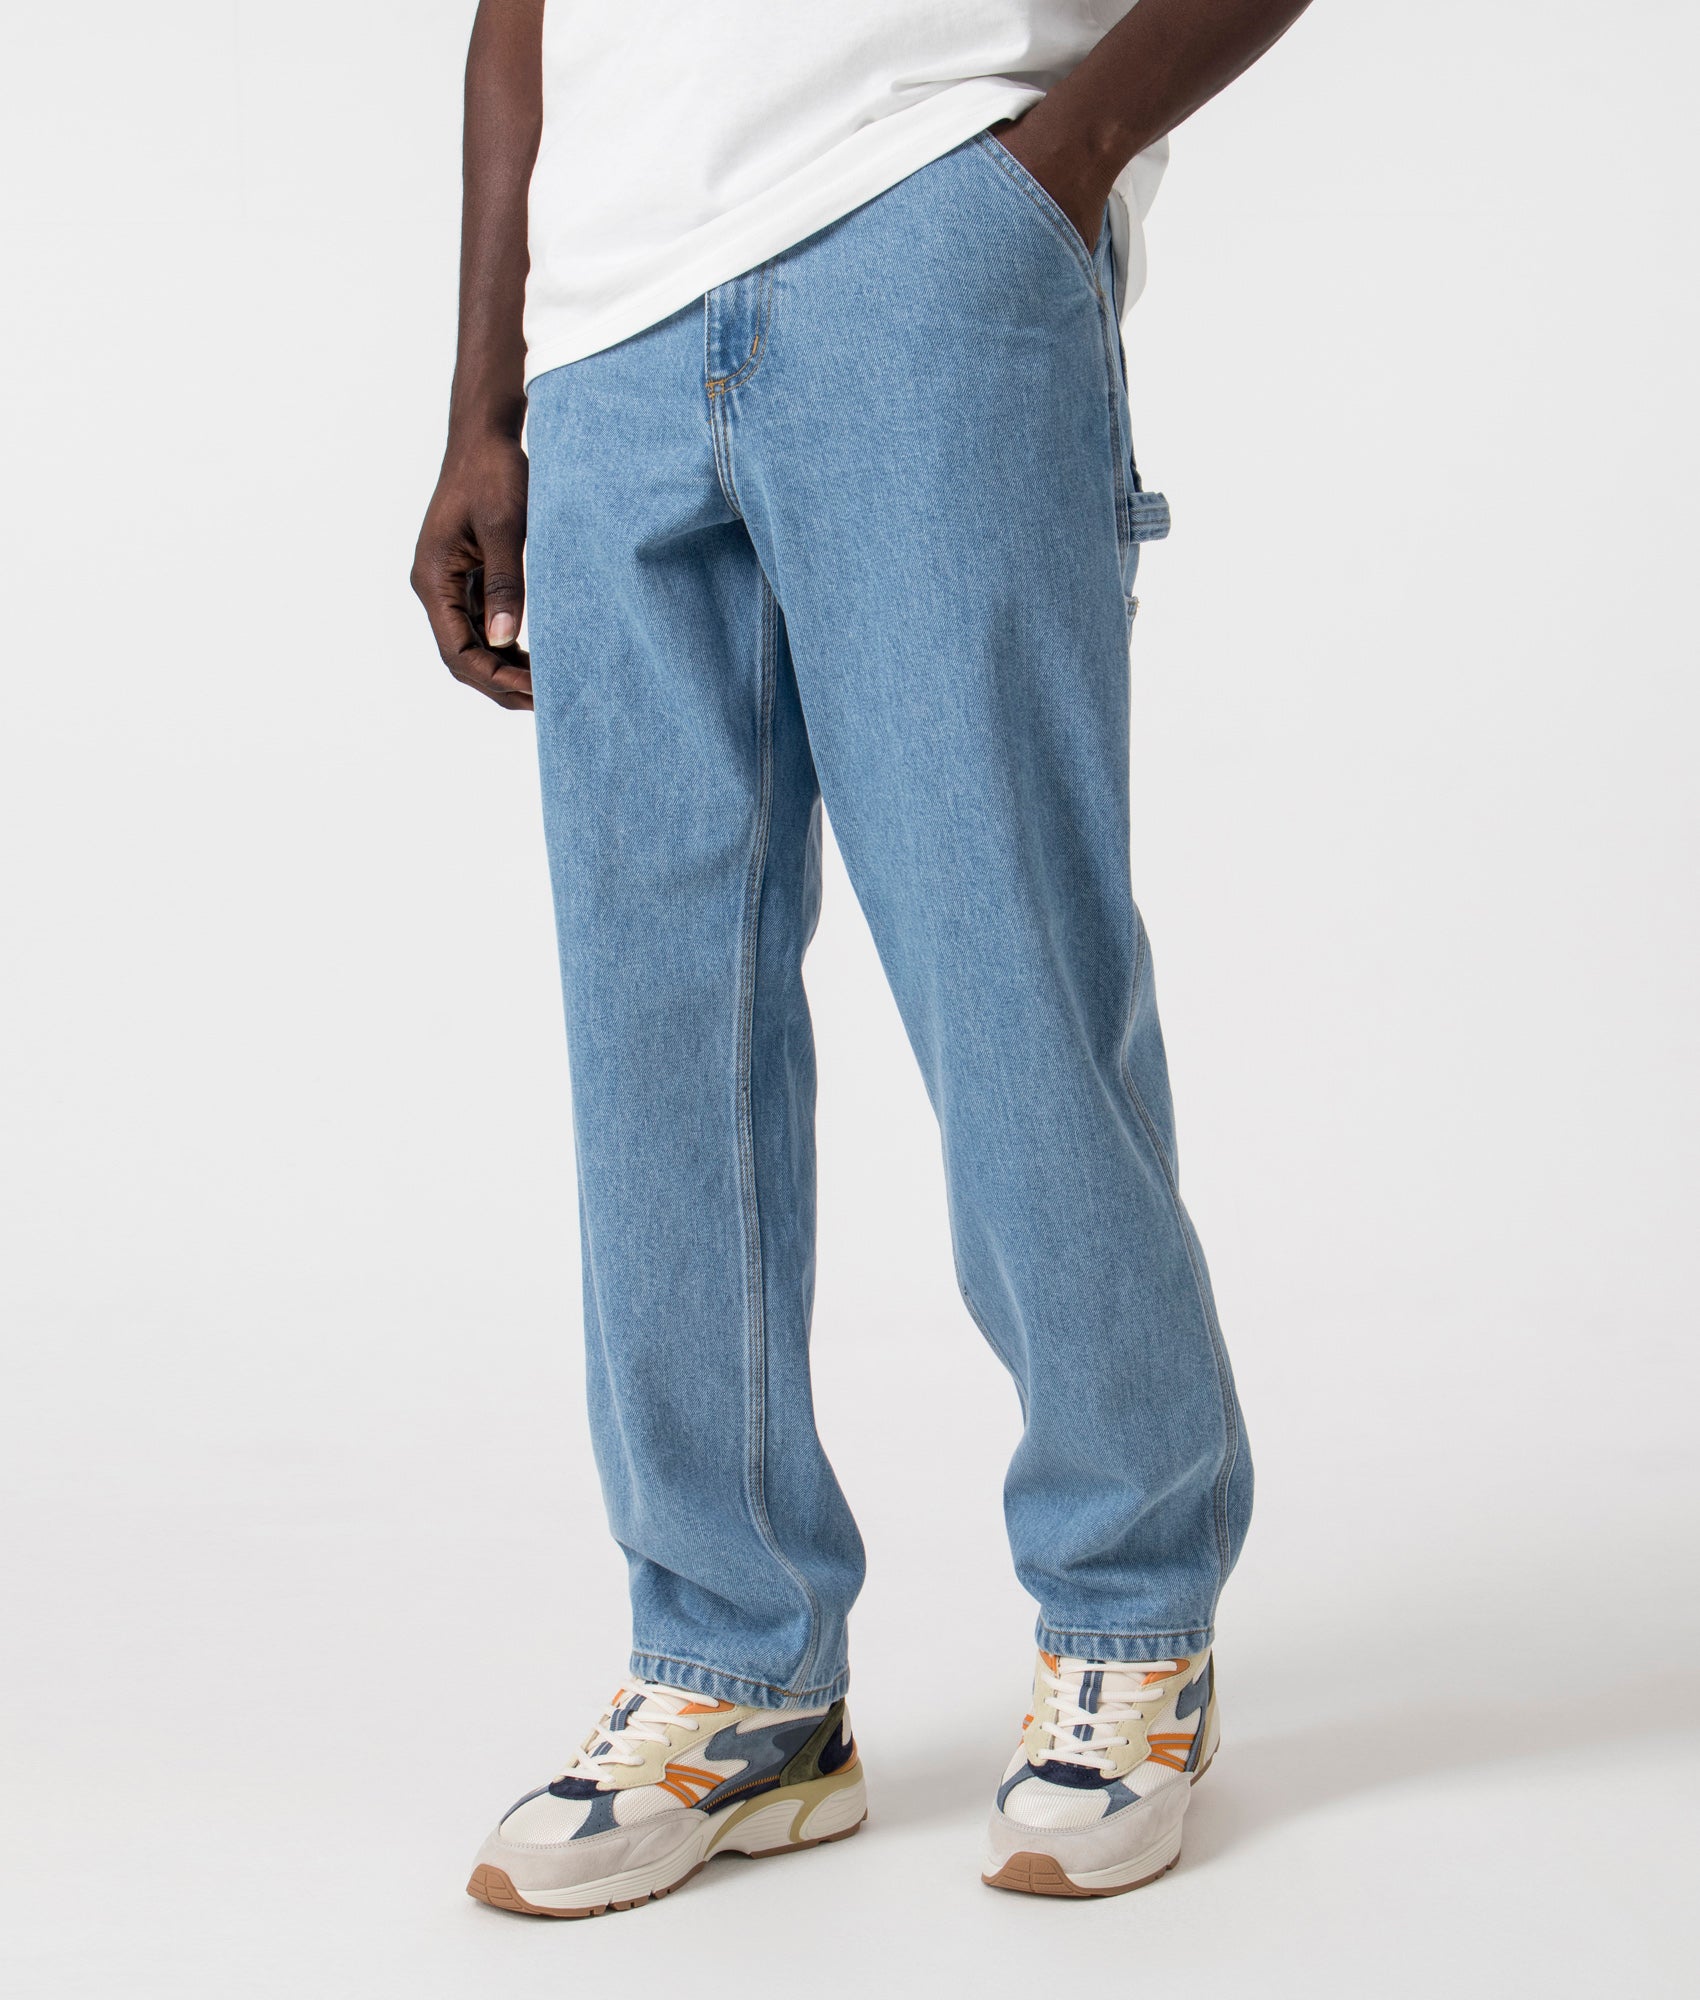 Carhartt WIP Mens Relaxed Fit Single Knee Pants - Colour: 0112 Blue - Size: 30R